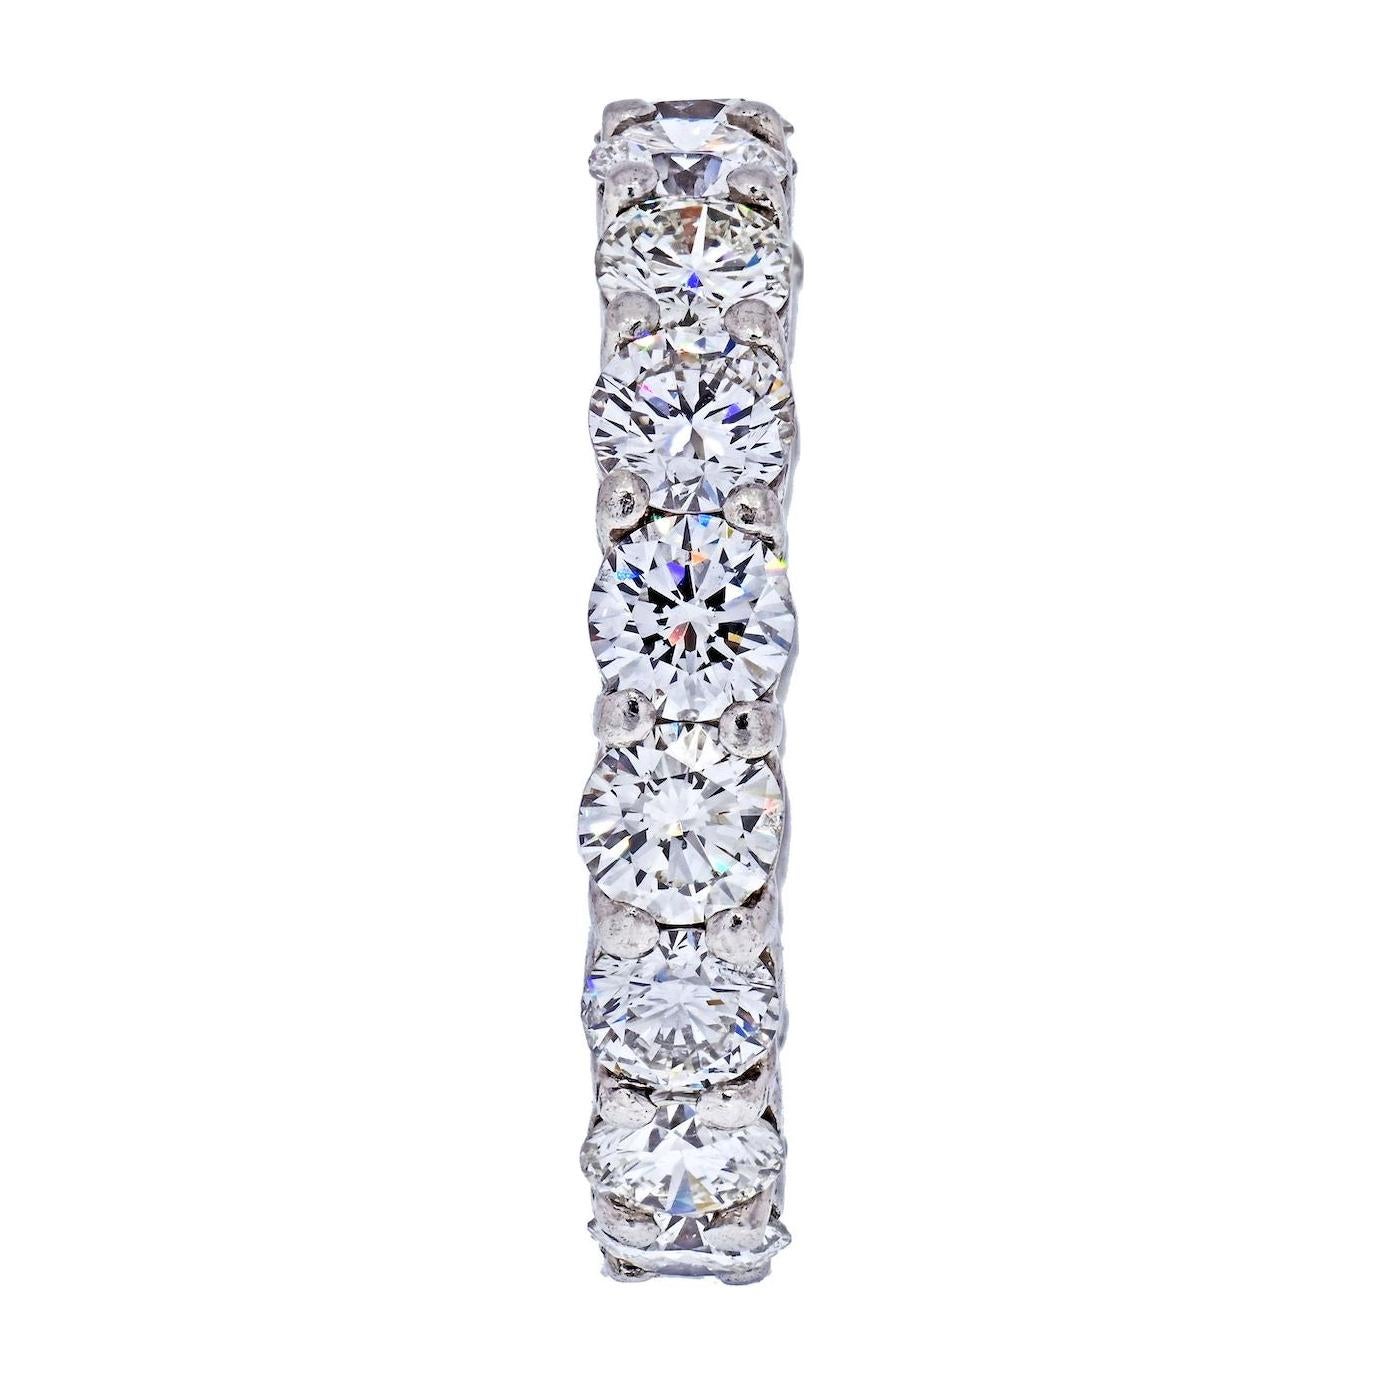 Classic eternity band crafted in platinum mounted with round brilliant cut diamonds. 
Each diamond is about 0.27ct each. 
Quality G-H color, VS-SI clarity. 
Clean to the naked eye. 
Size 7 
Width: 4mm
